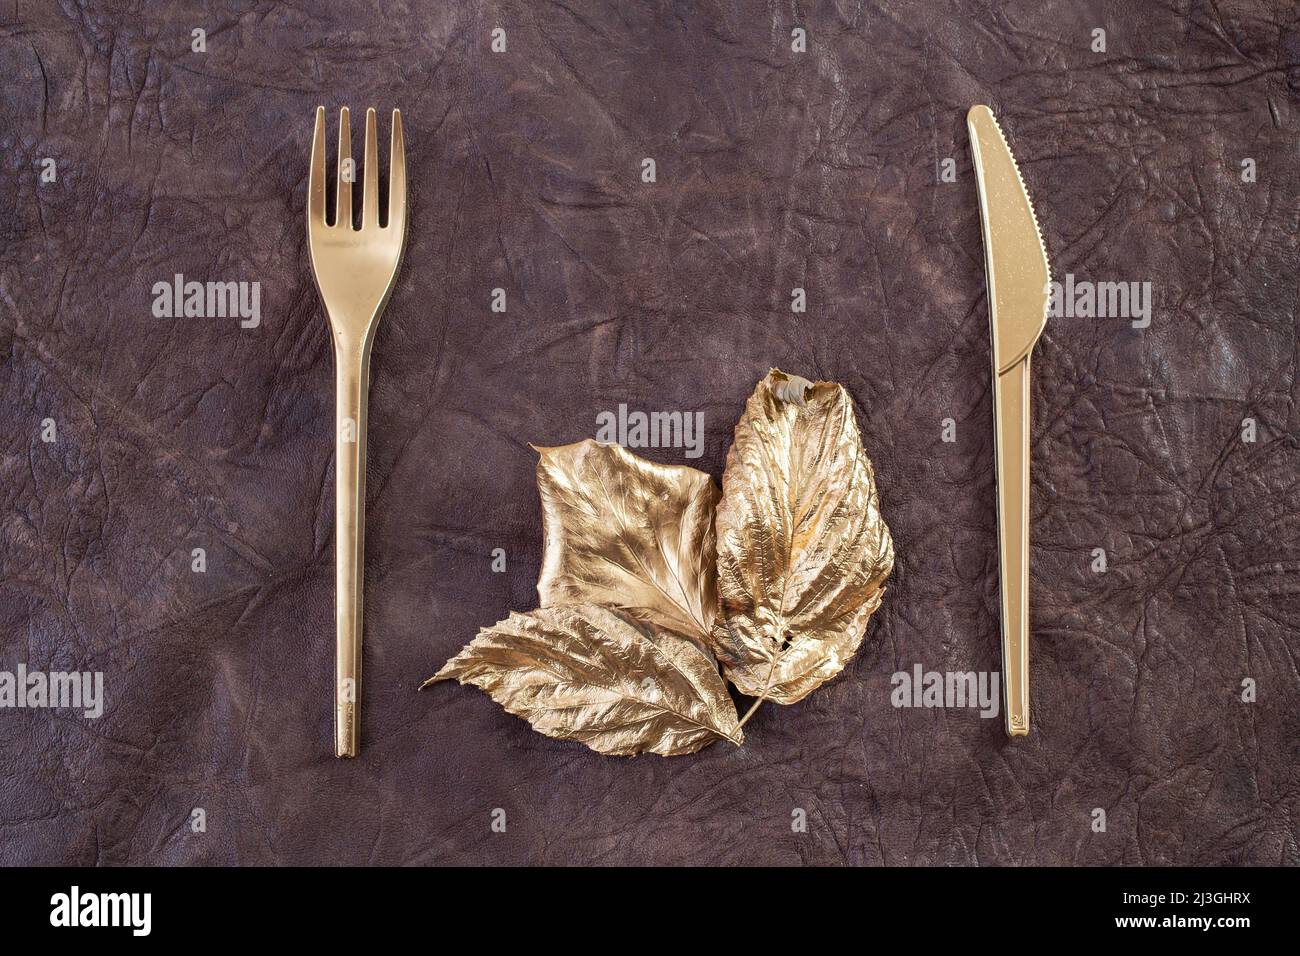 golden fork, knife and leaves, on brown leather texture, abstract wall art concept for food industry Stock Photo